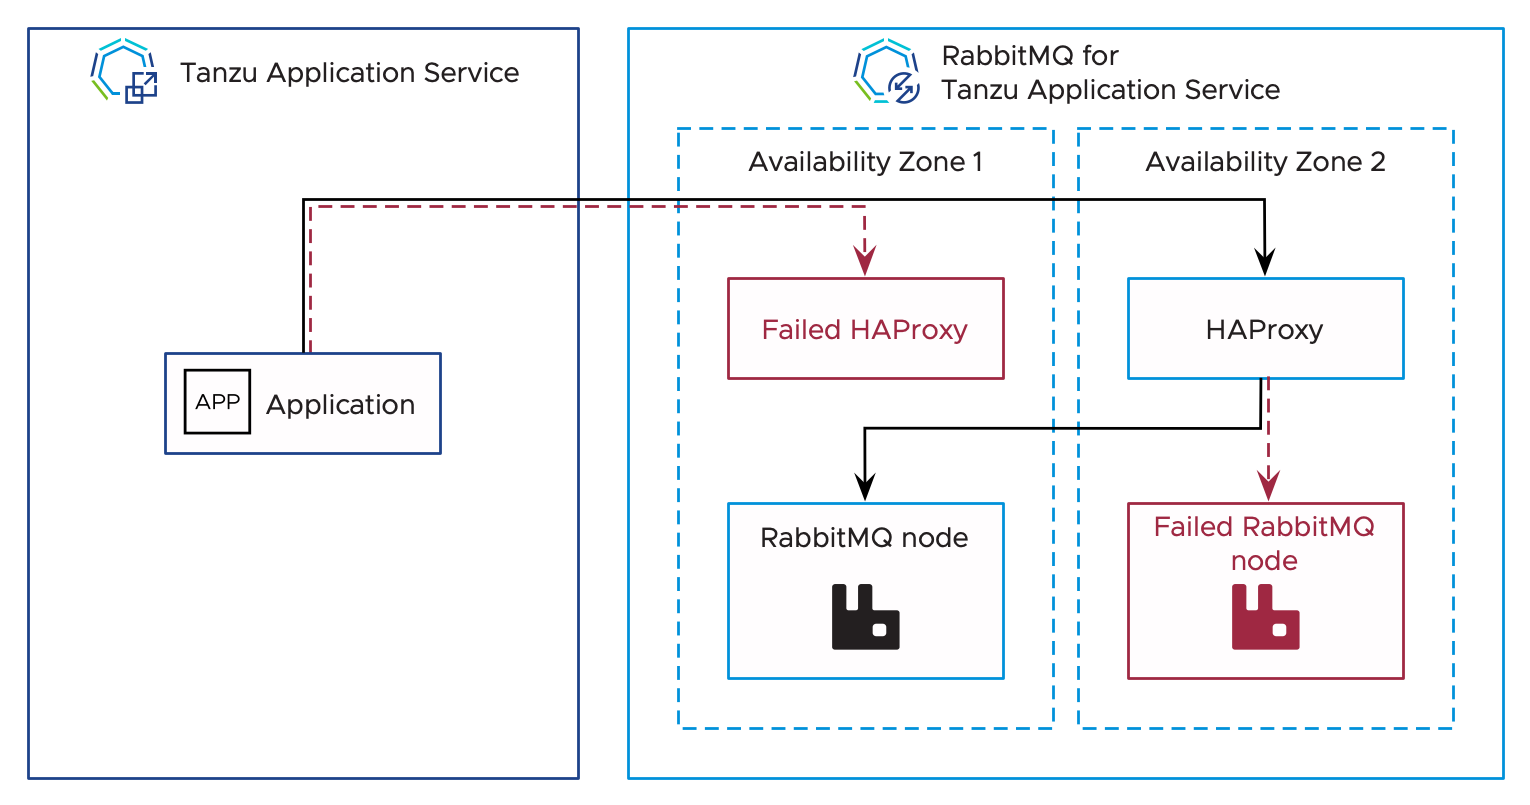 An app is inside 'Tanzu Application Service'. It tries to communicate
to the failed HAProxy and to a functioning HA Proxy. The HA proxy
tries to communicate with the failed RabbitMQ node before communicating
with a functioning RabbitMQ node. These components are inside the VMware RabbitMQ for Tanzu Application Service
service, within Availability Zone 1 and Availability Zone 2.